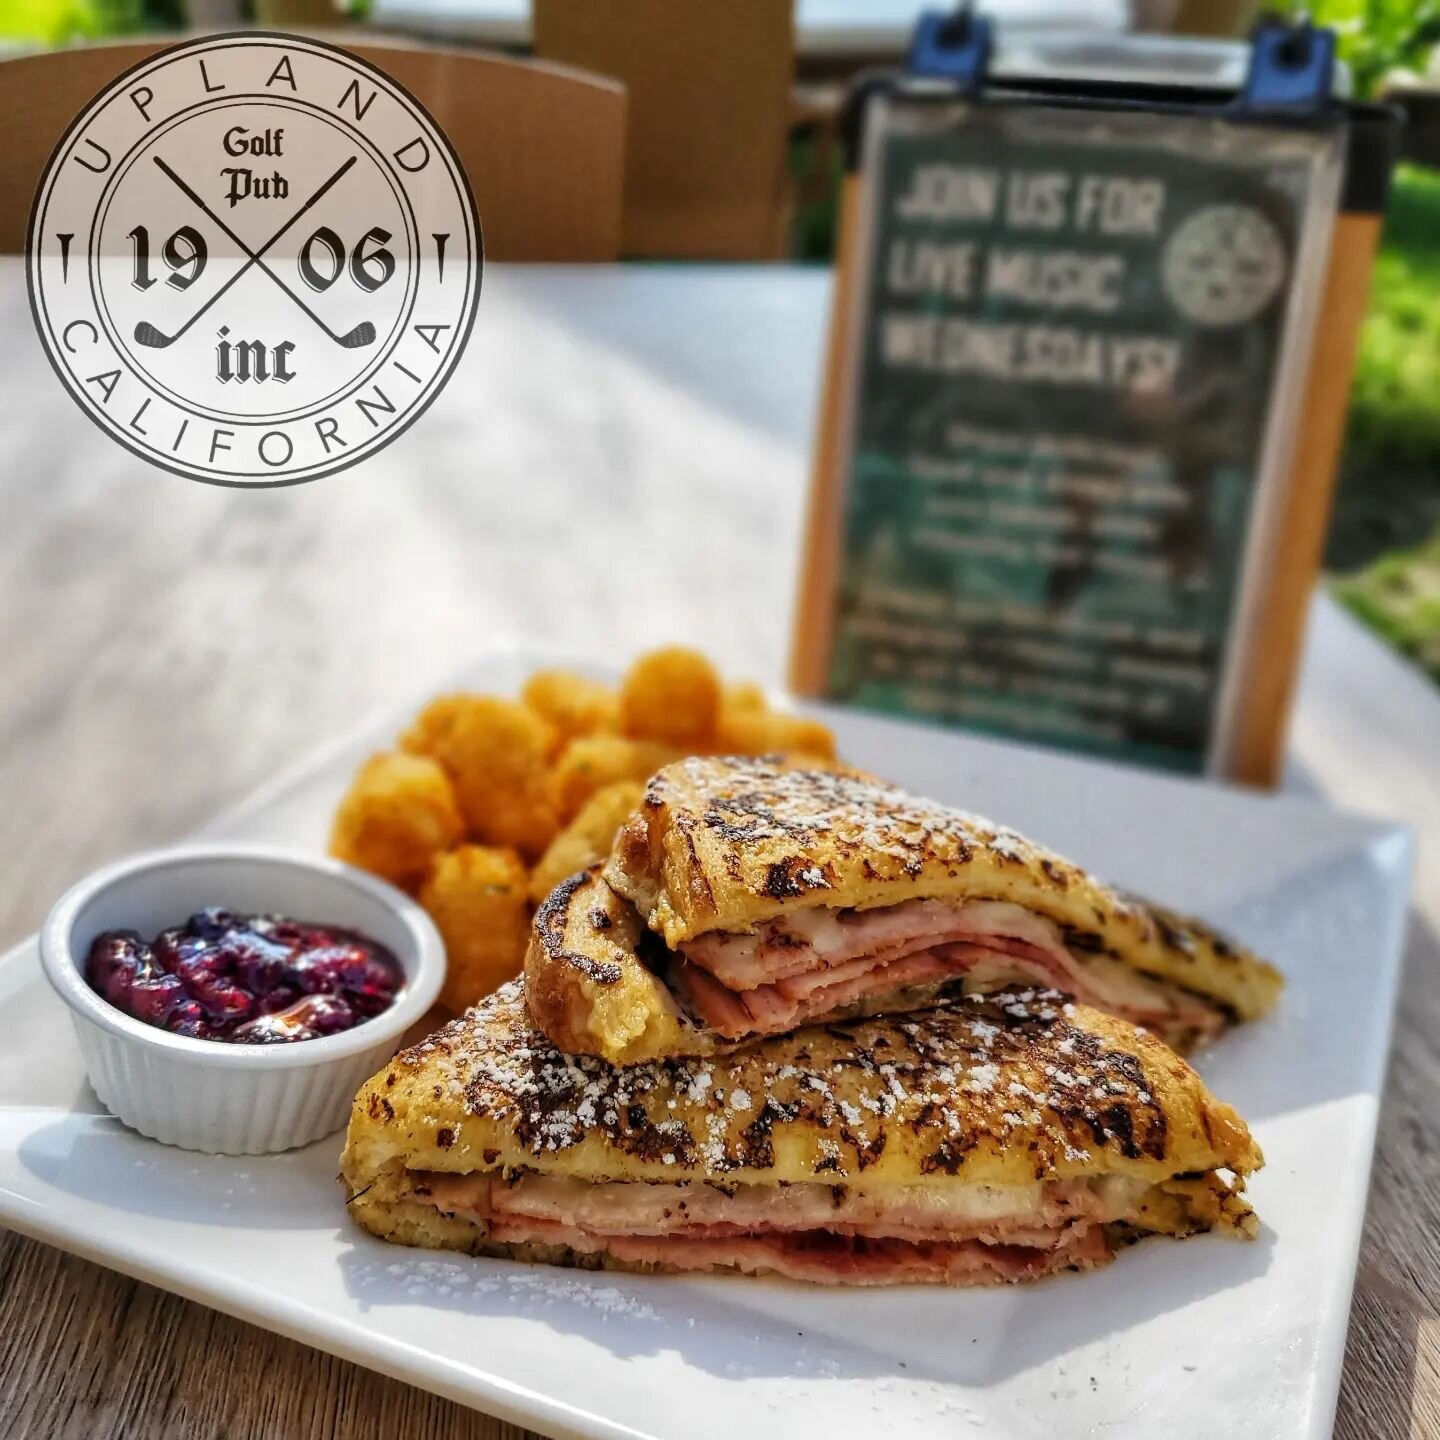 We serve up our special brunch menu every Sunday, but we have a delicious brunch-worthy sandwich that's available ALL WEEK LONG: our Monte Cristo Sandwich!! Now served with our house made mixed berry jam 😋
&bull;
&bull;
&bull;
French toast battered 